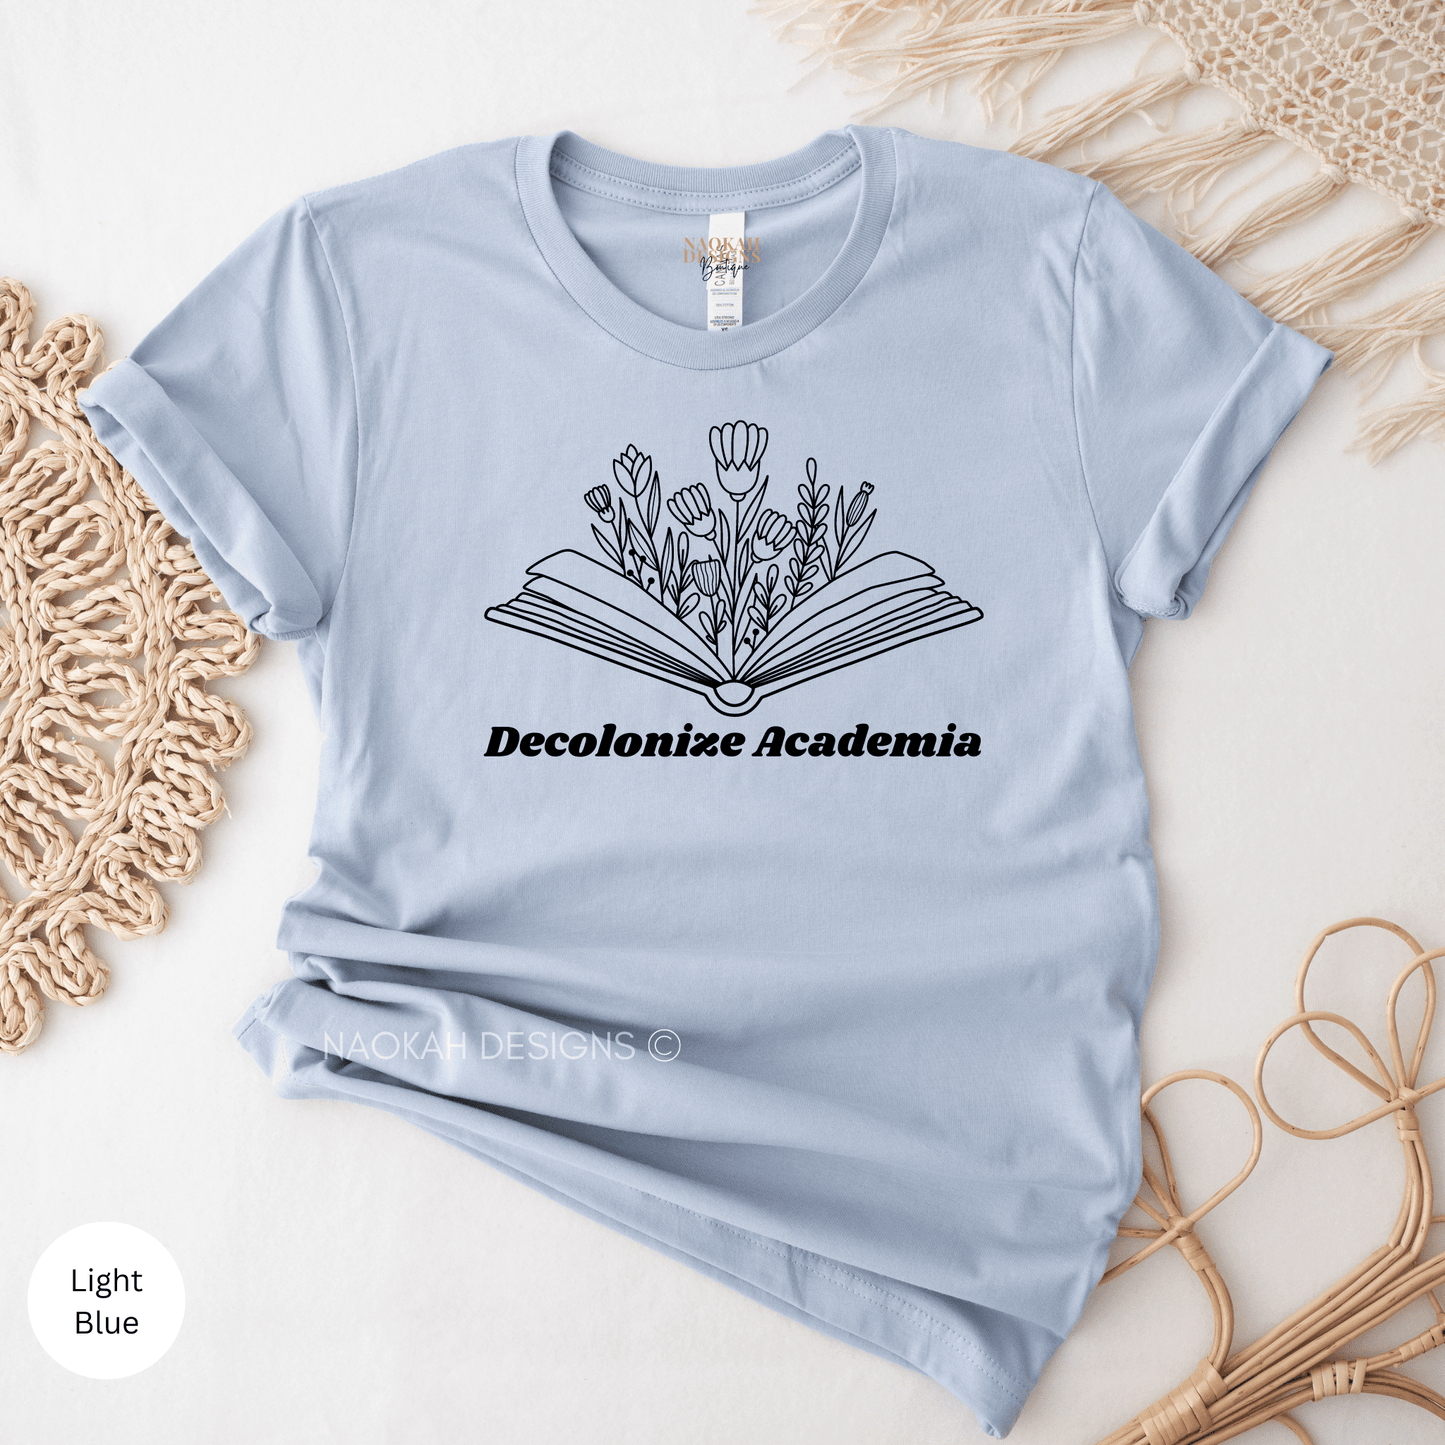 decolonize academia shirt, decolonize shirt, ancestral teaching, indigenous, native pride, you are on native land, you are on indigenous land, colonialism, native teaching, indigenous owned, anti racist, anti colonialism, native american shirt, social justice shirt, no one is illegal, mmiw, decolonize anthropology, dismantle systems of oppression